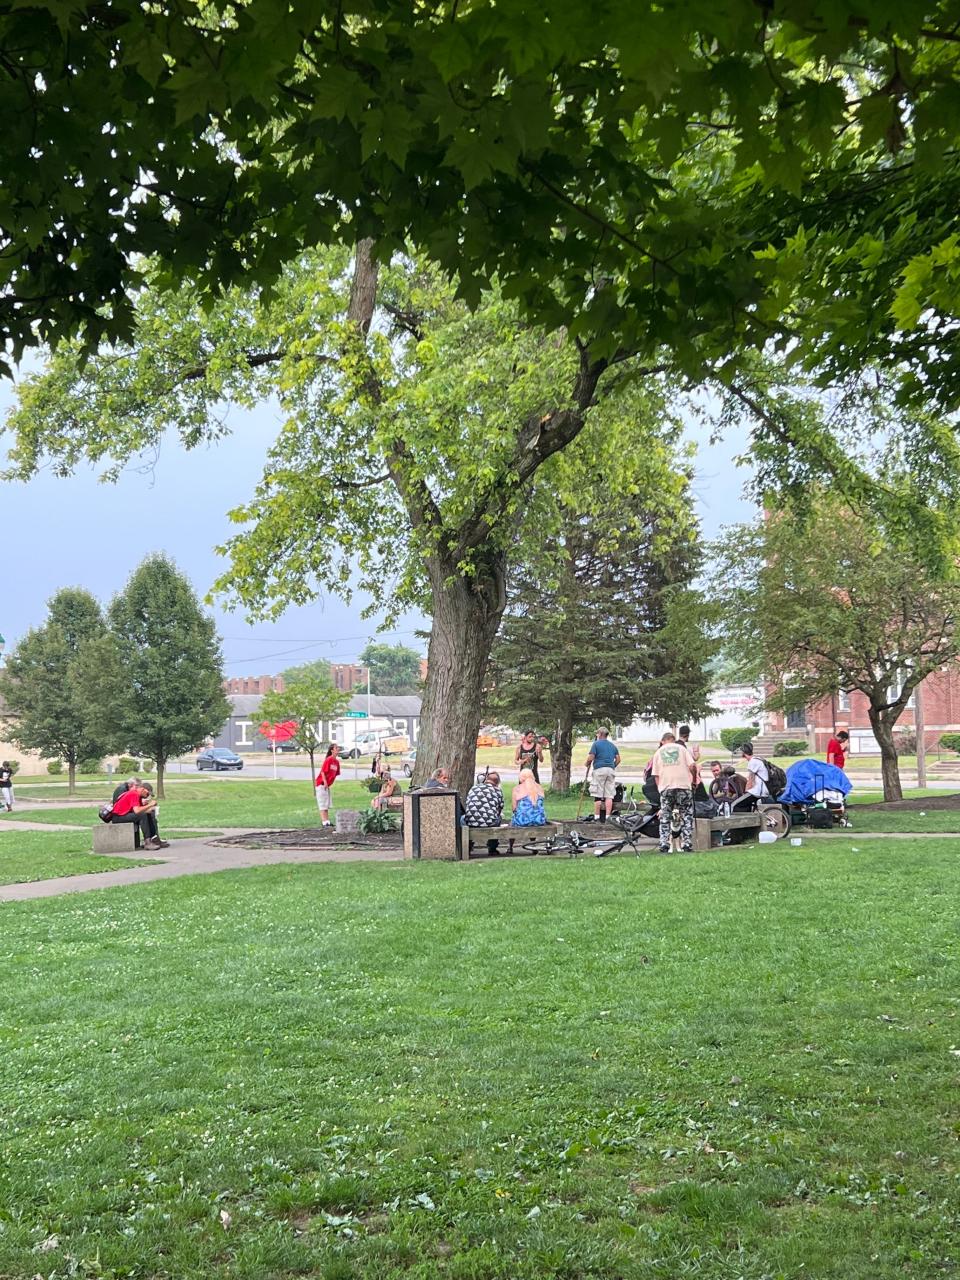 A towering tree in the front lawn of The Salvation Army provides shade for those waiting for meals at the shelter on East Main Street.